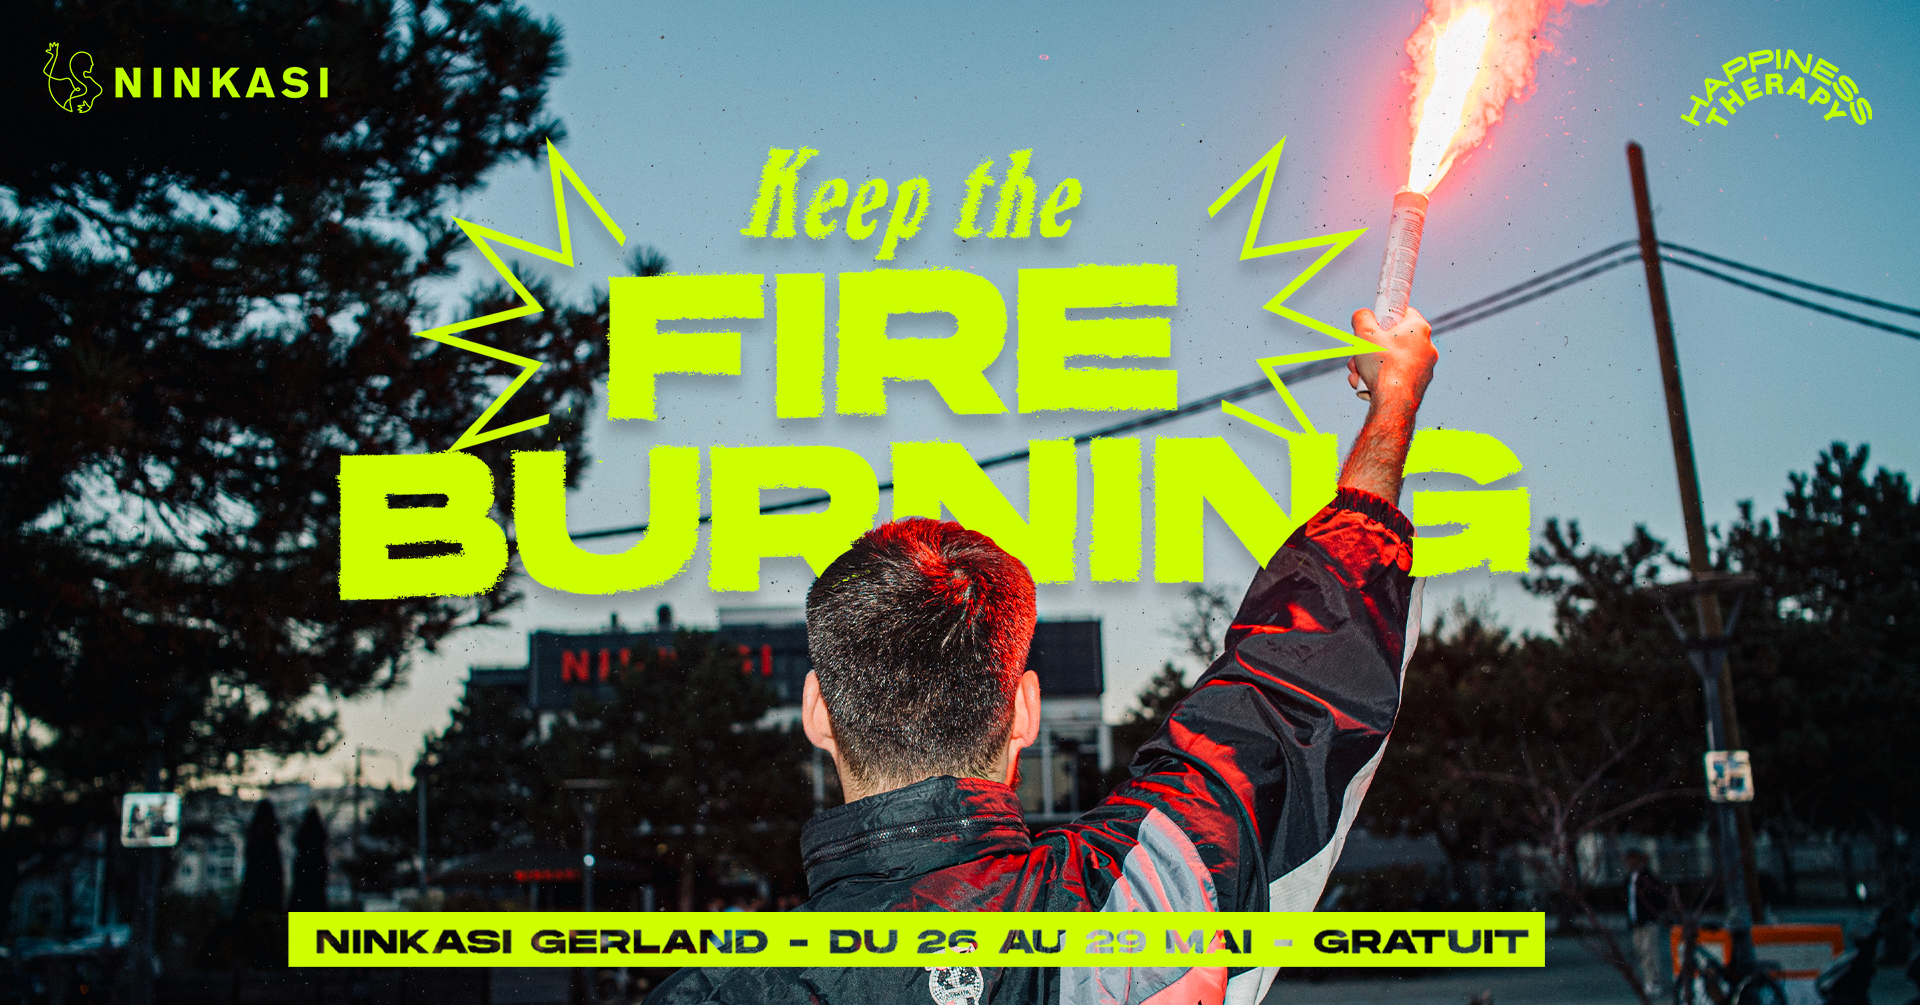 Open Air Gratuit • Happiness Therapy x Ninkasi: Keep The Fire Burning - フライヤー表